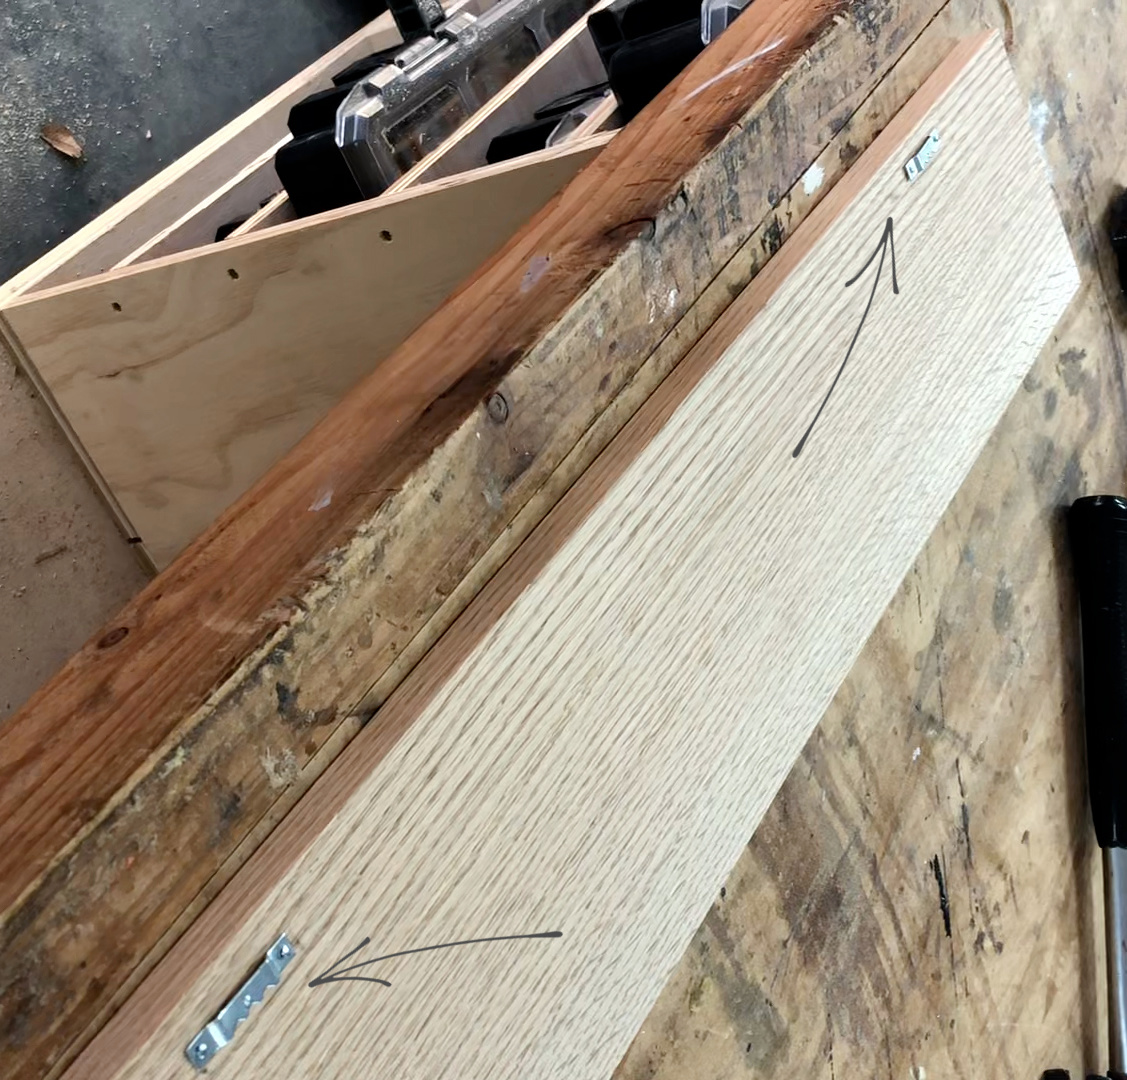 Sawtooth hangers attached to back side of board